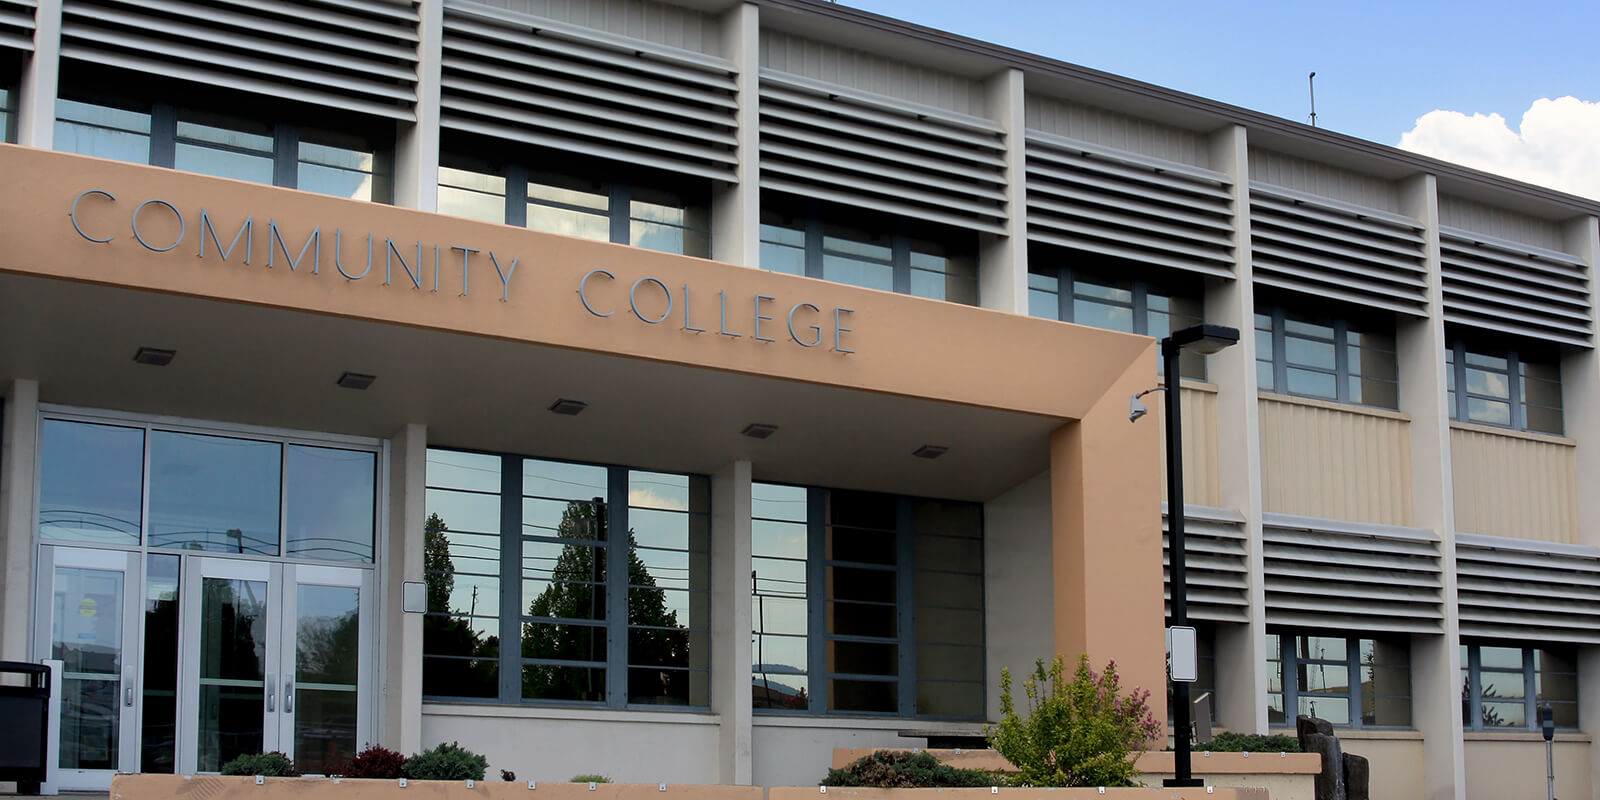 Maryland expands collective bargaining rights to over 2,000 community college workers